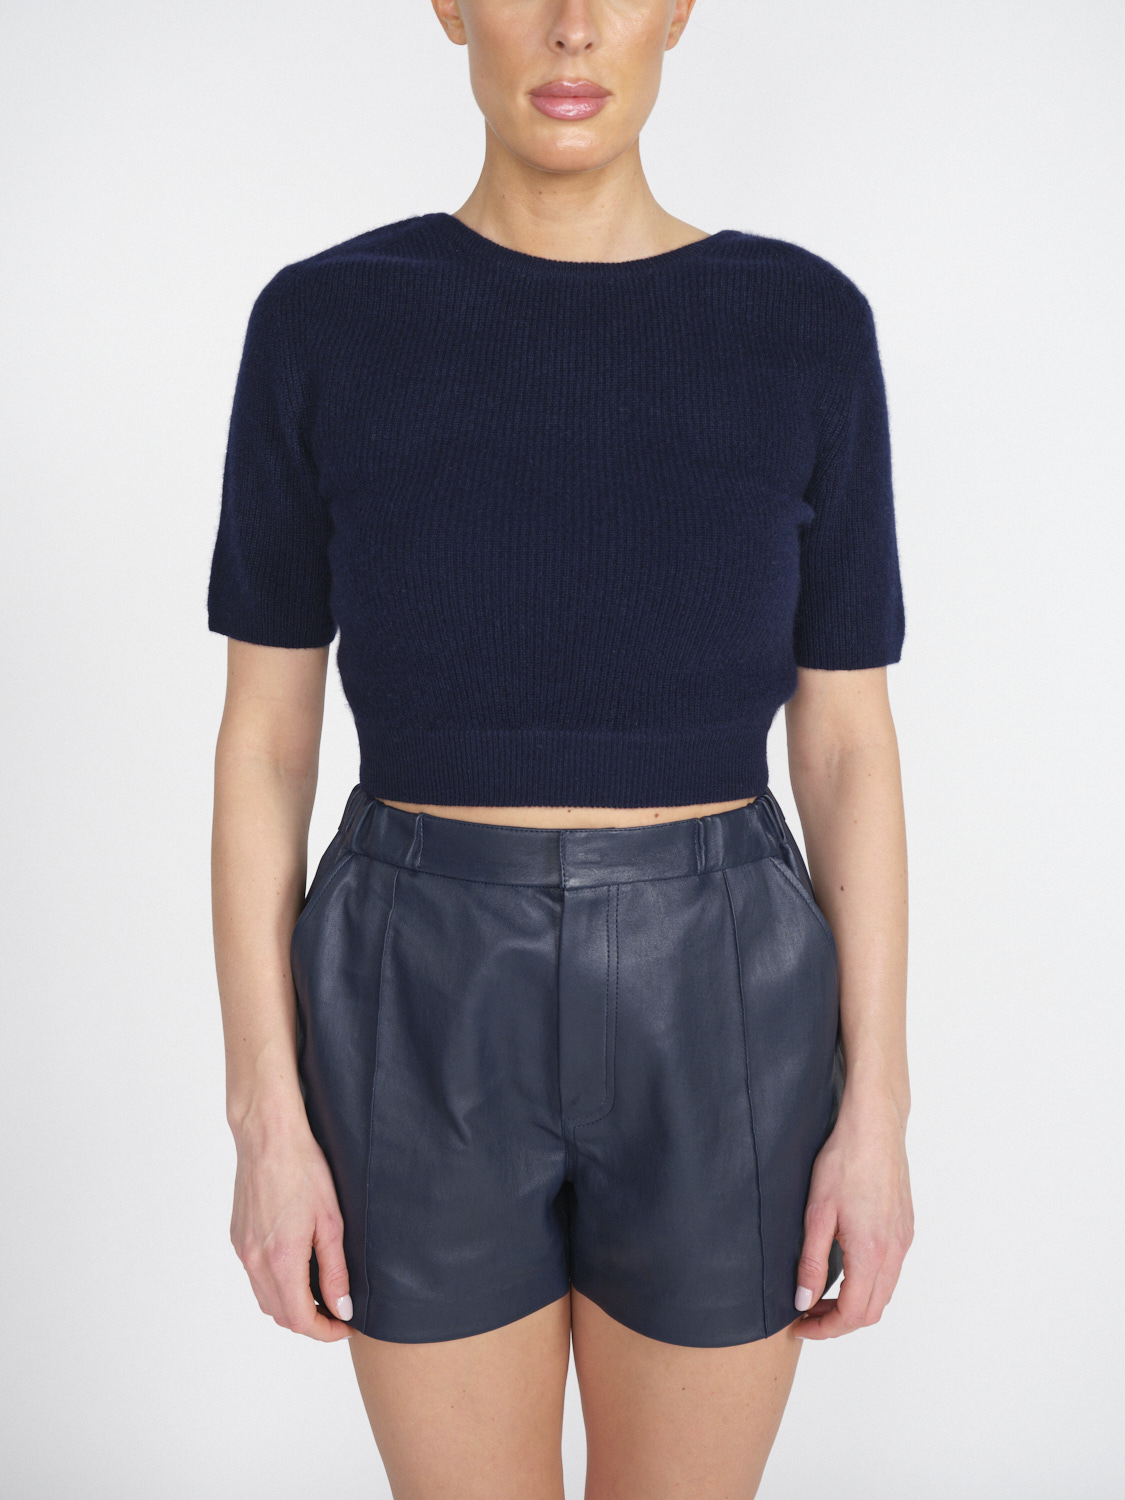 Lisa Yang Josefina - Short sleeve cashmere jumper with cut-out  marine XS/S